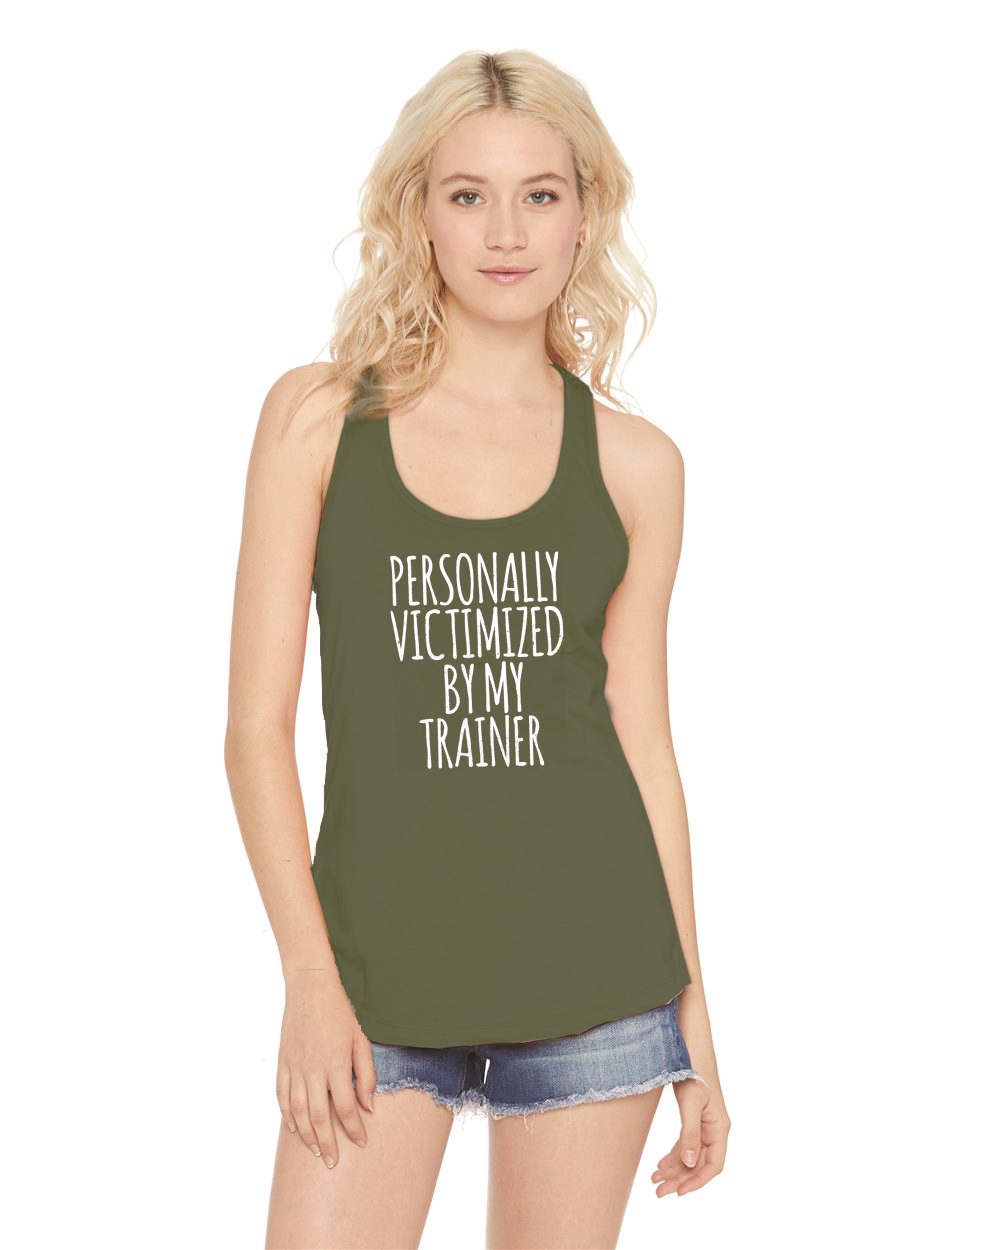 Ladies Personally Victimized By Trainer Racerback Gym Workout Fitness 6141